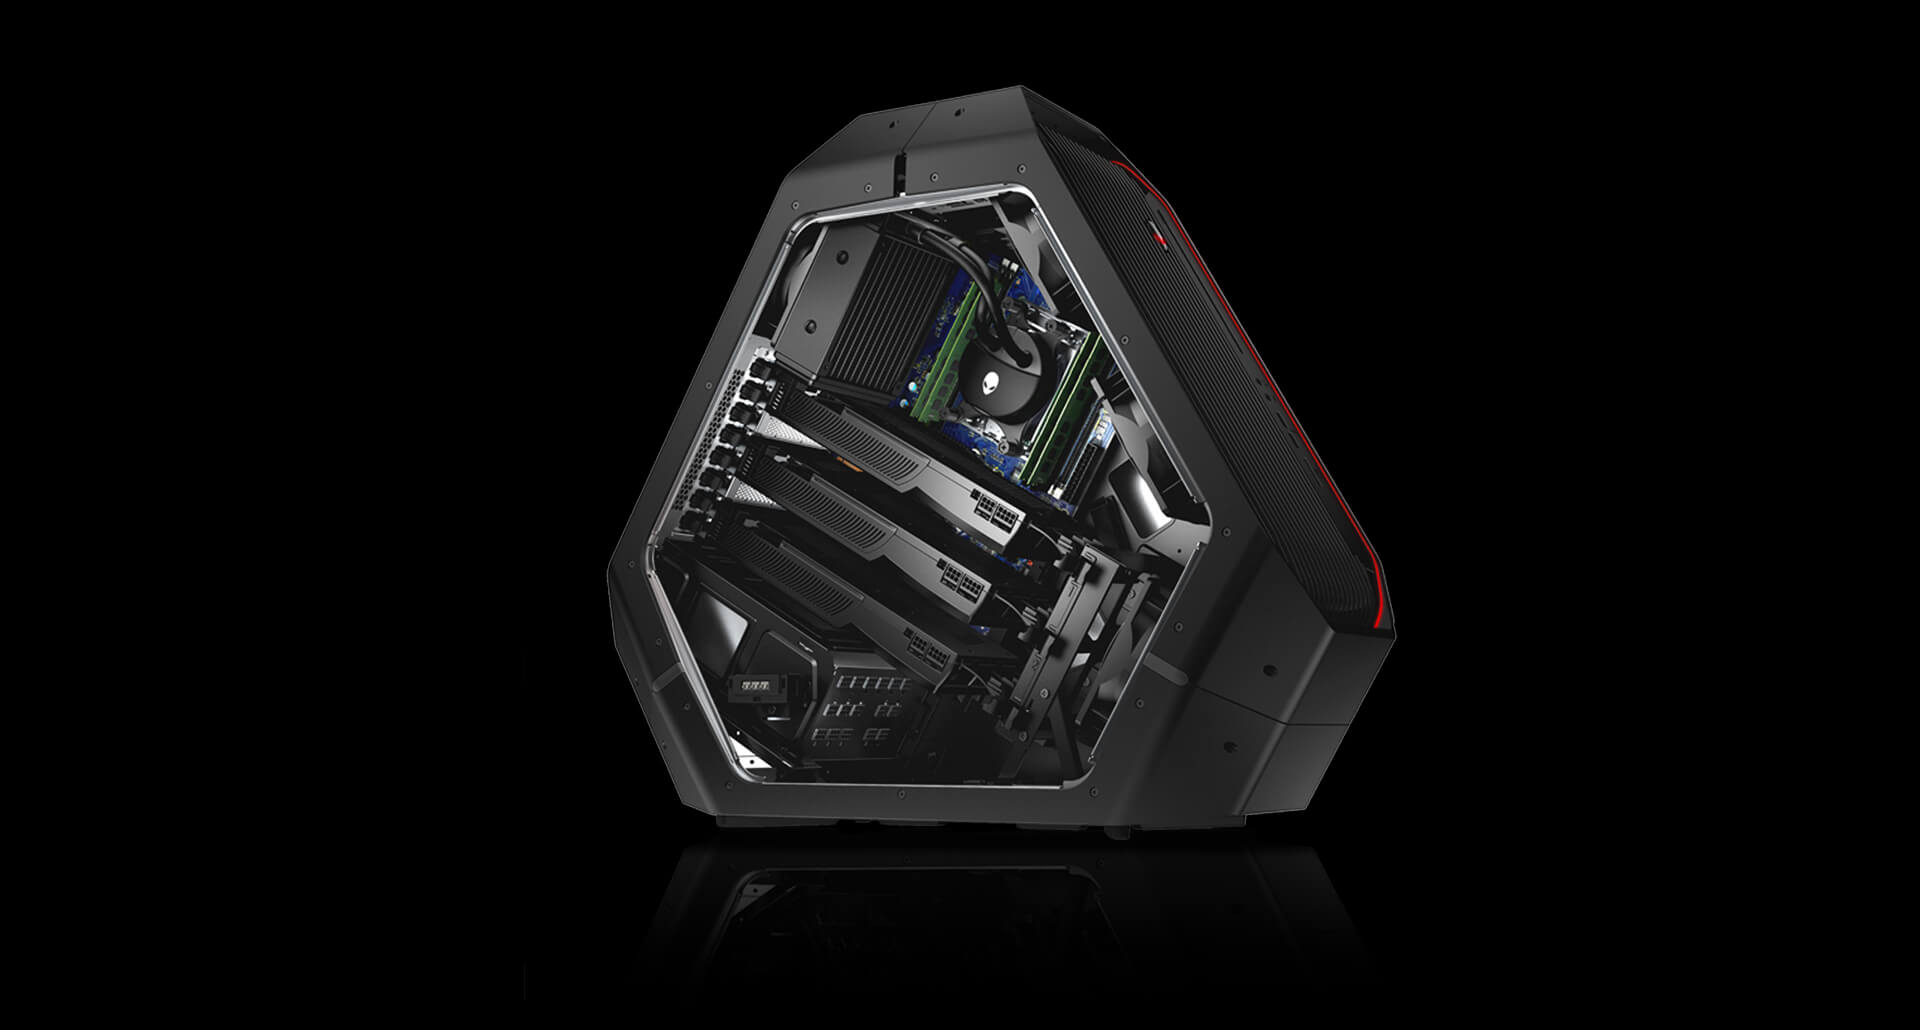 Alienware Area-51 updated with new multi-core processors